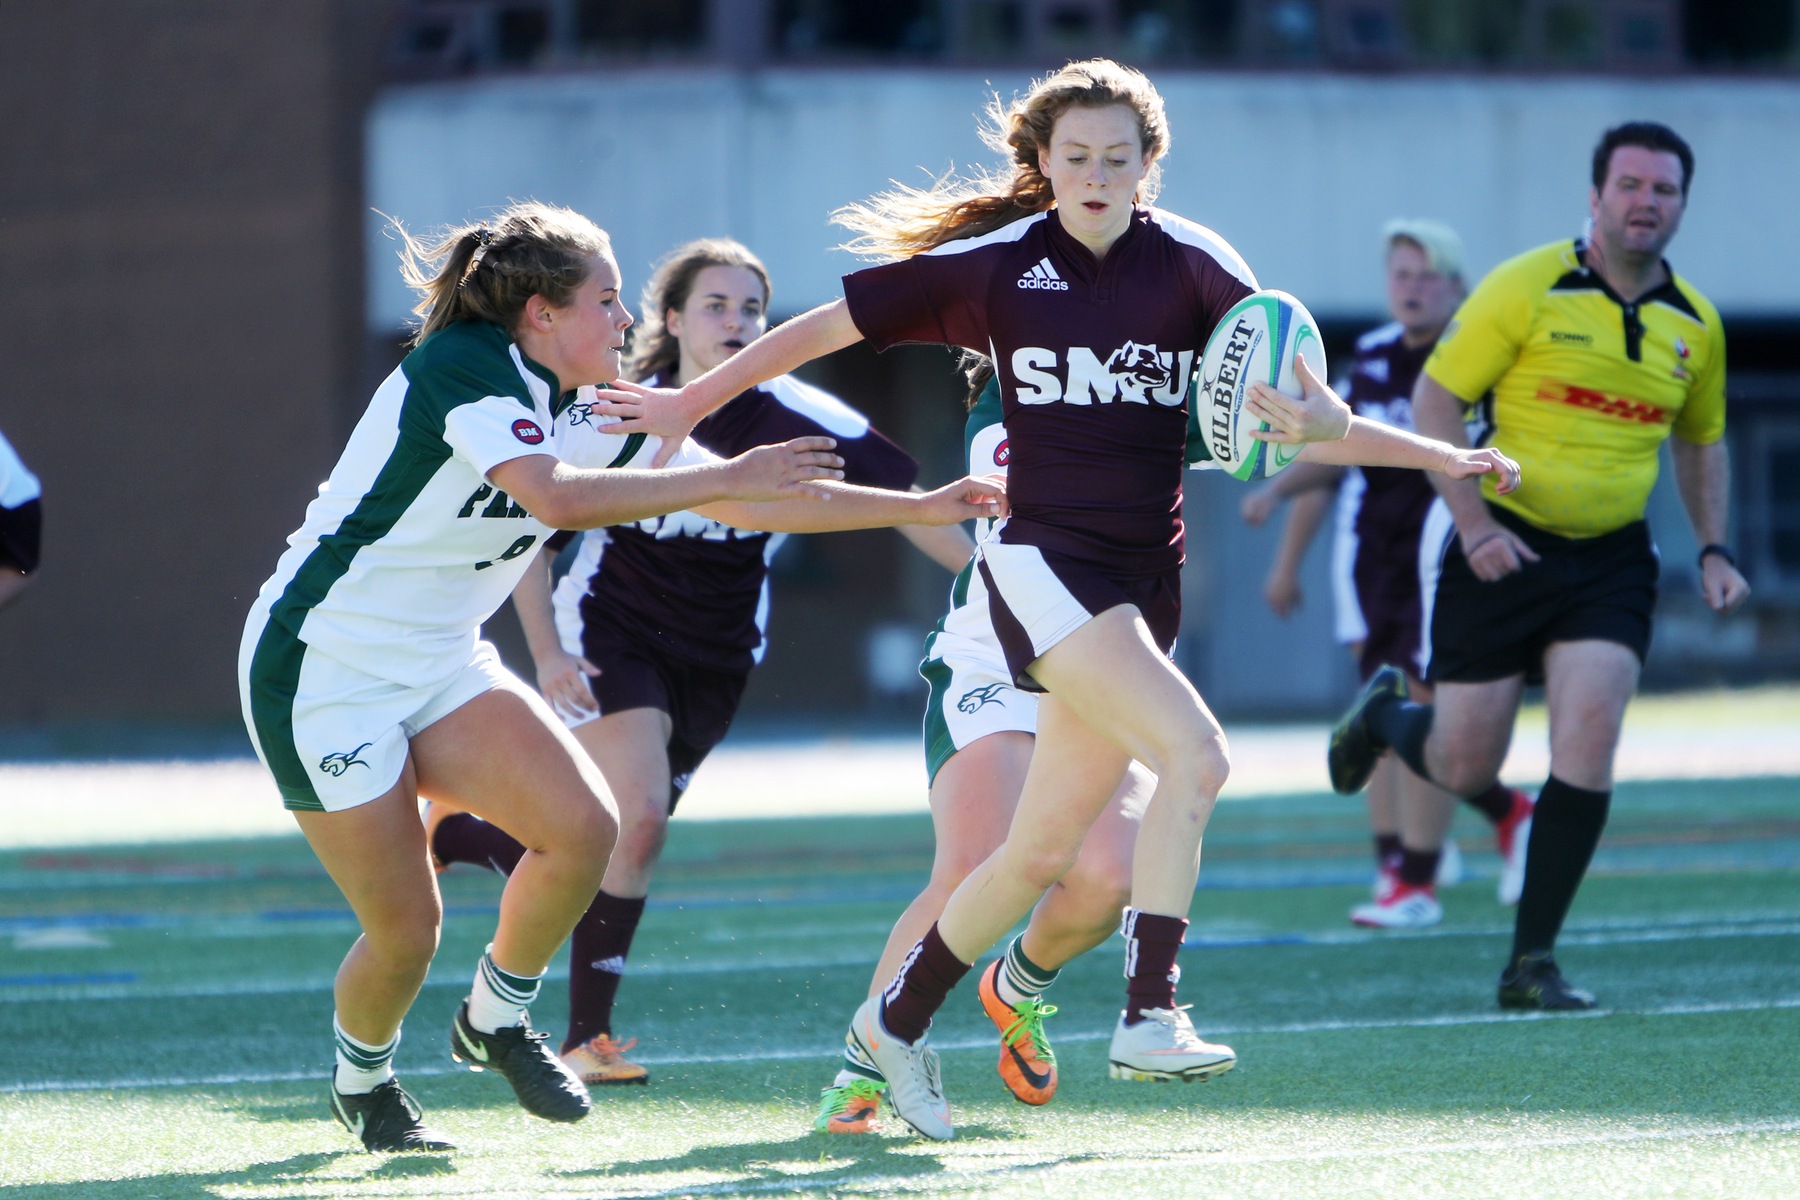 UPEI upends SMU with 25-12 rugby win